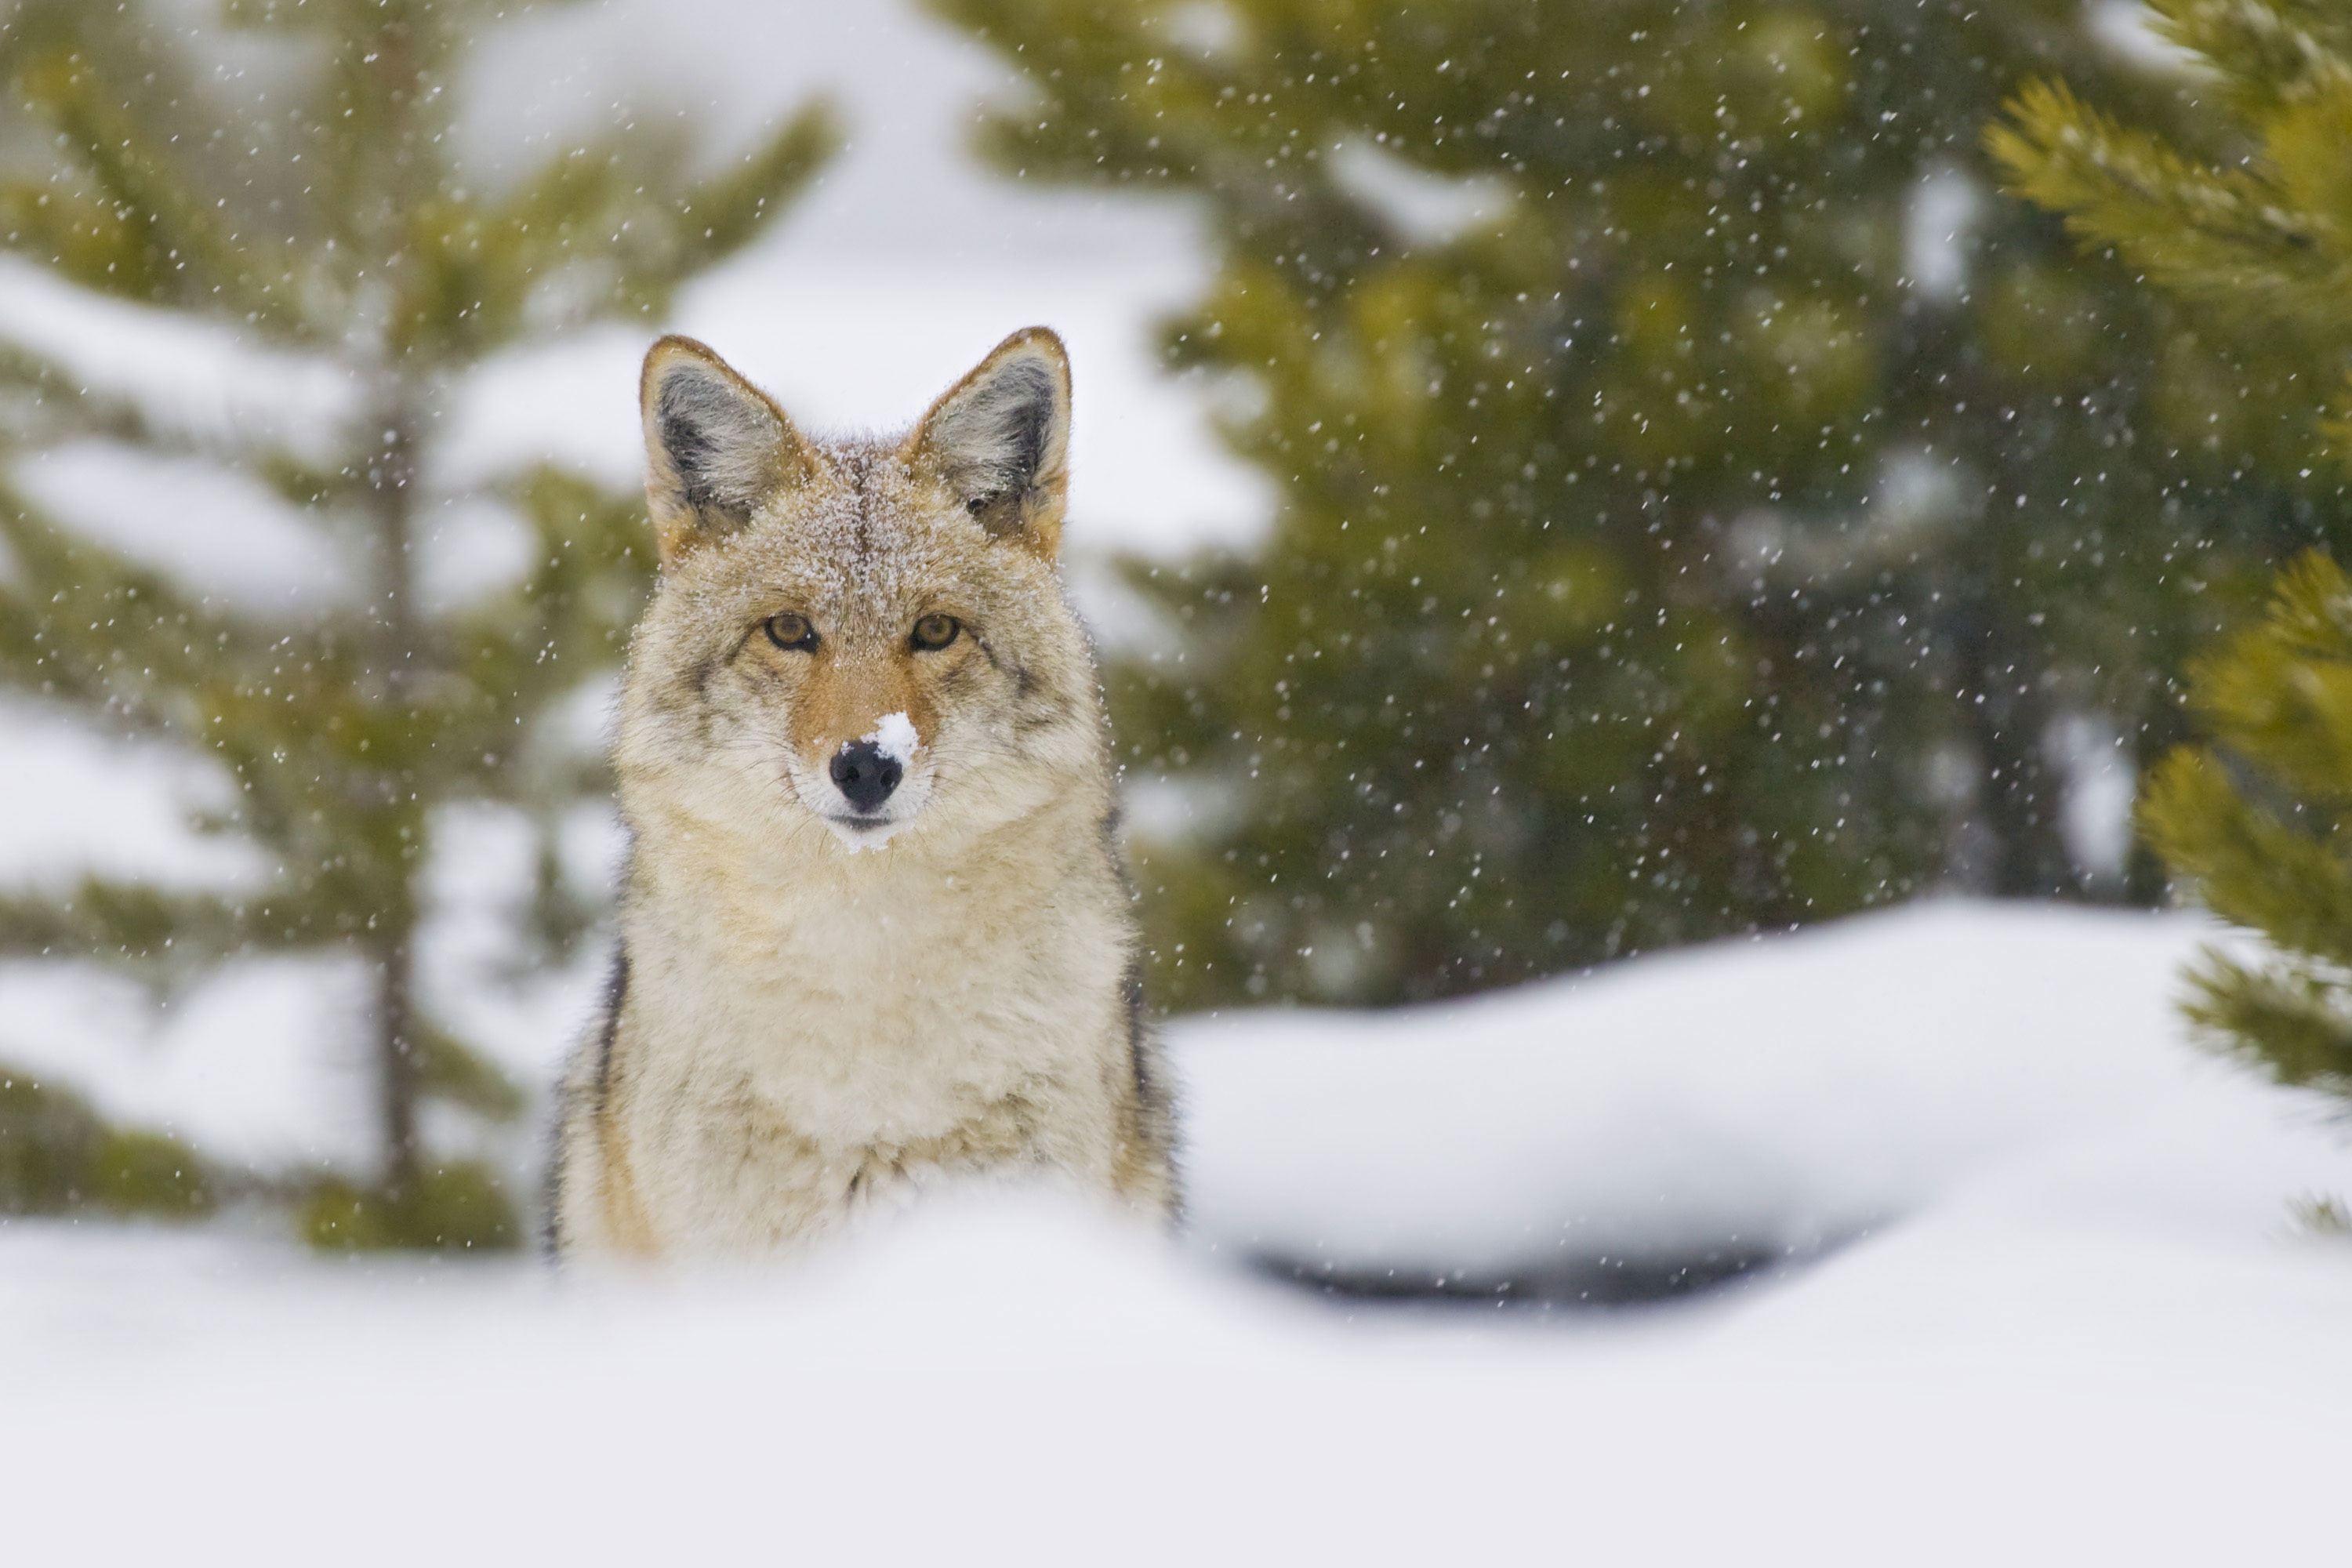 Photo for: Coyote Sightings May be More Common in Winter